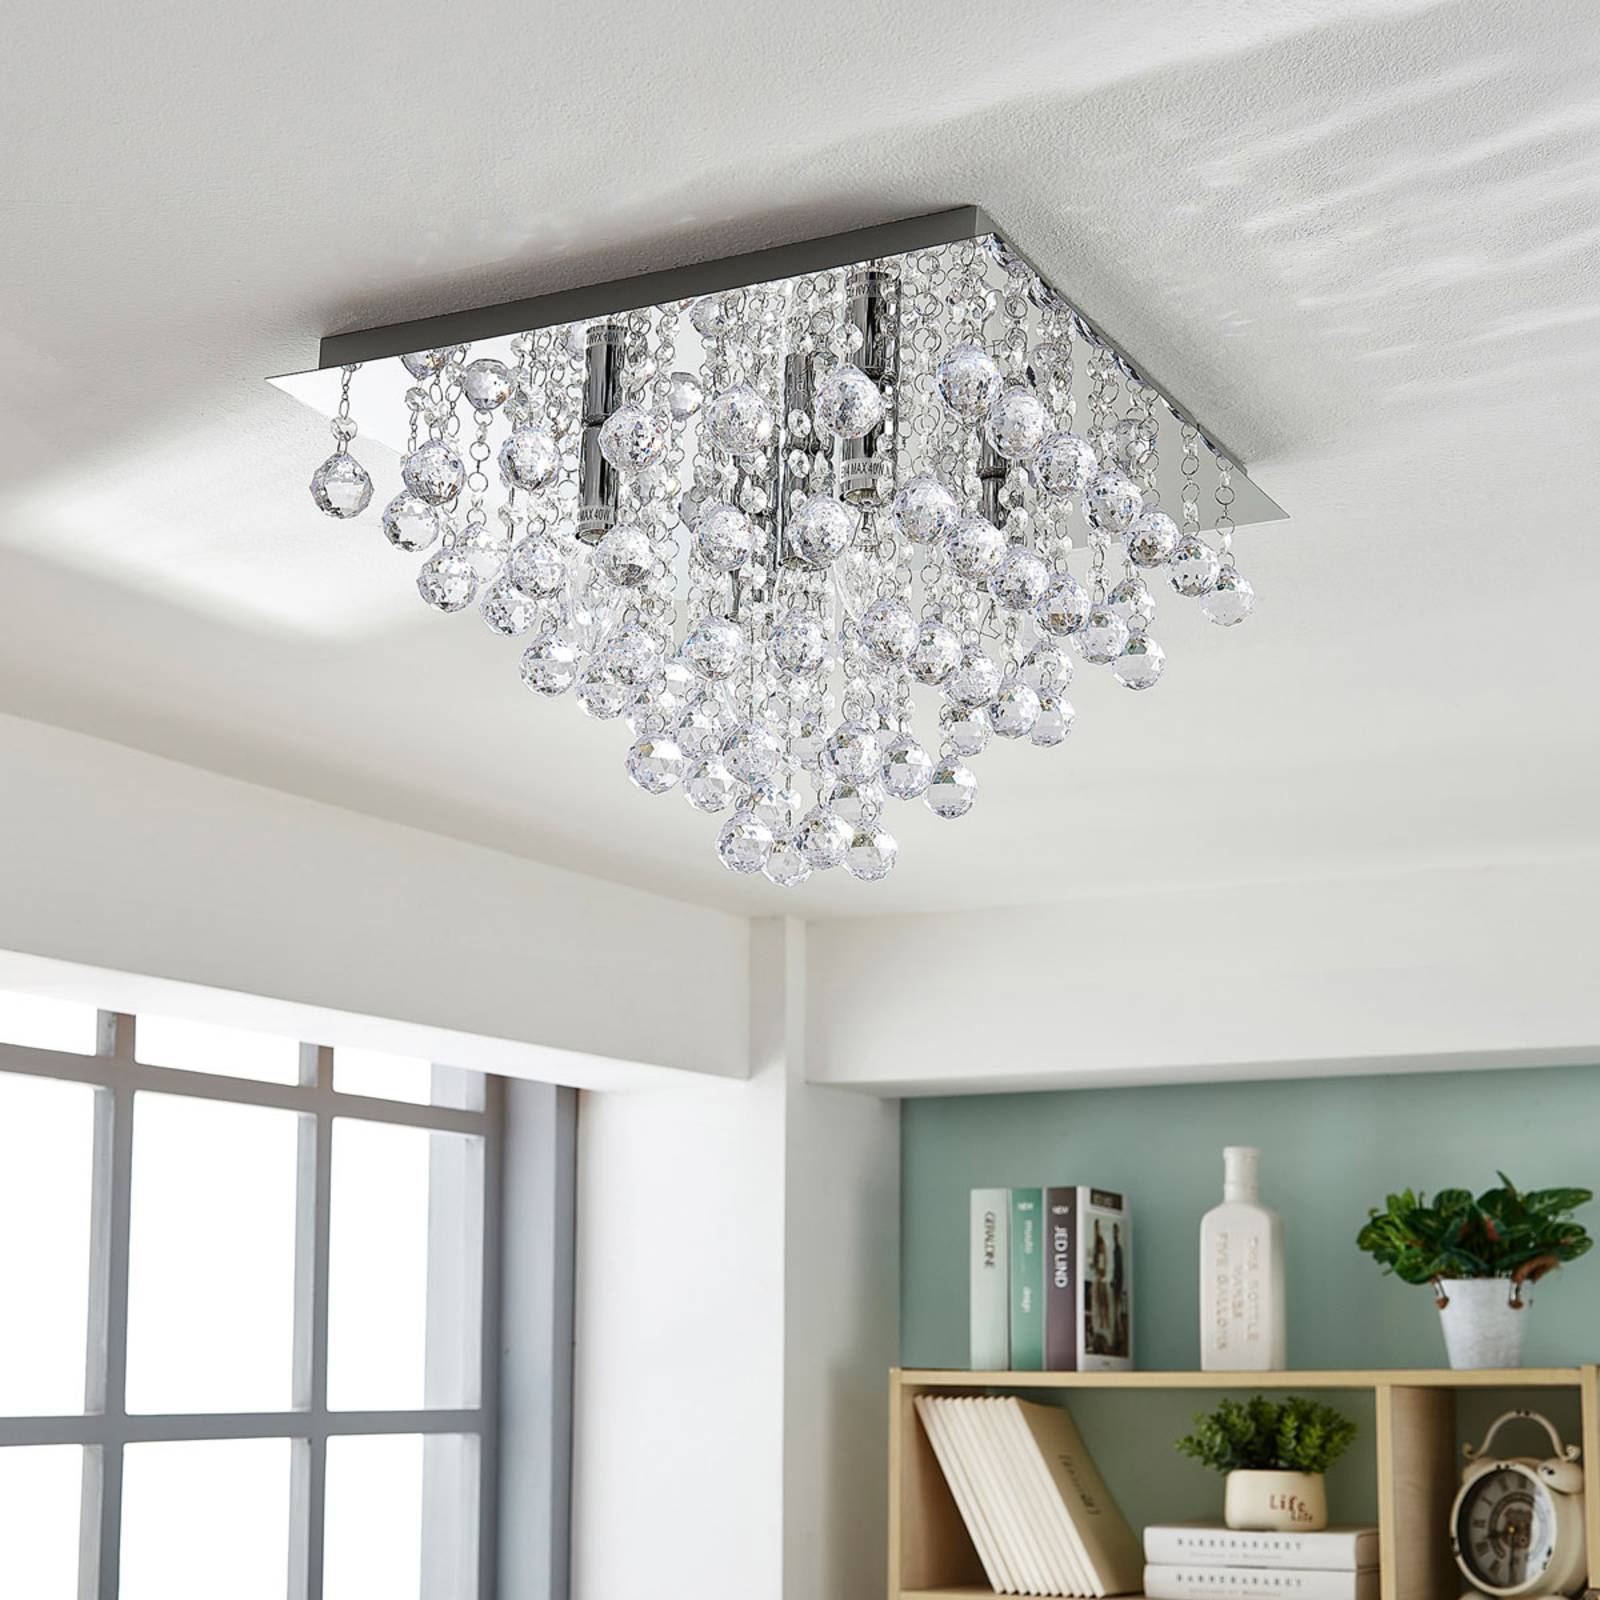 Photos - Chandelier / Lamp Lindby Annica angular ceiling light with acrylic elements 